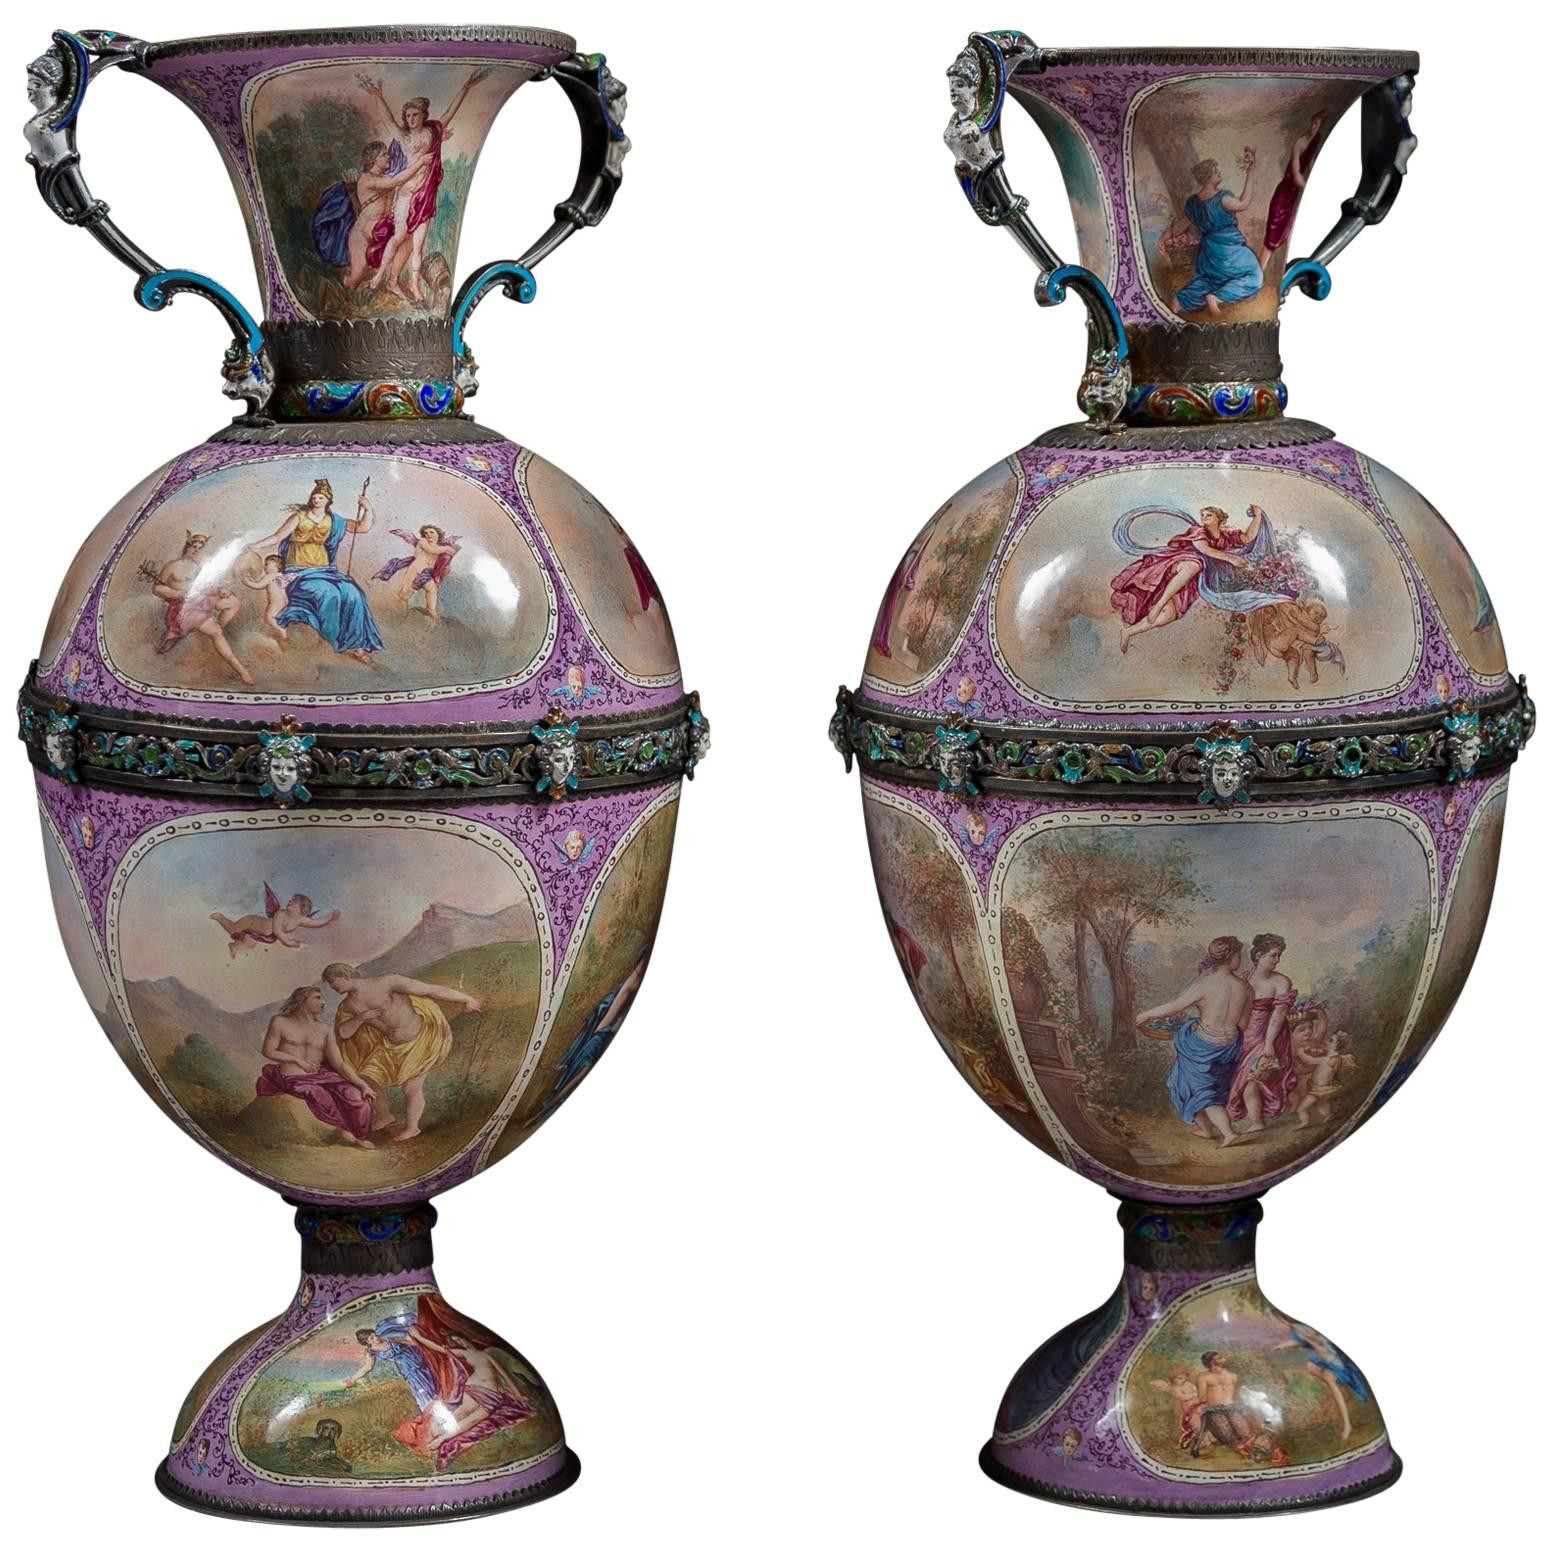 23 Nice Global Views Ovoid Vase 2024 free download global views ovoid vase of 19th century viennese nef of silver and enamel by hermann bac2b6hm at pertaining to 19th century viennese nef of silver and enamel by hermann bac2b6hm at 1stdibs